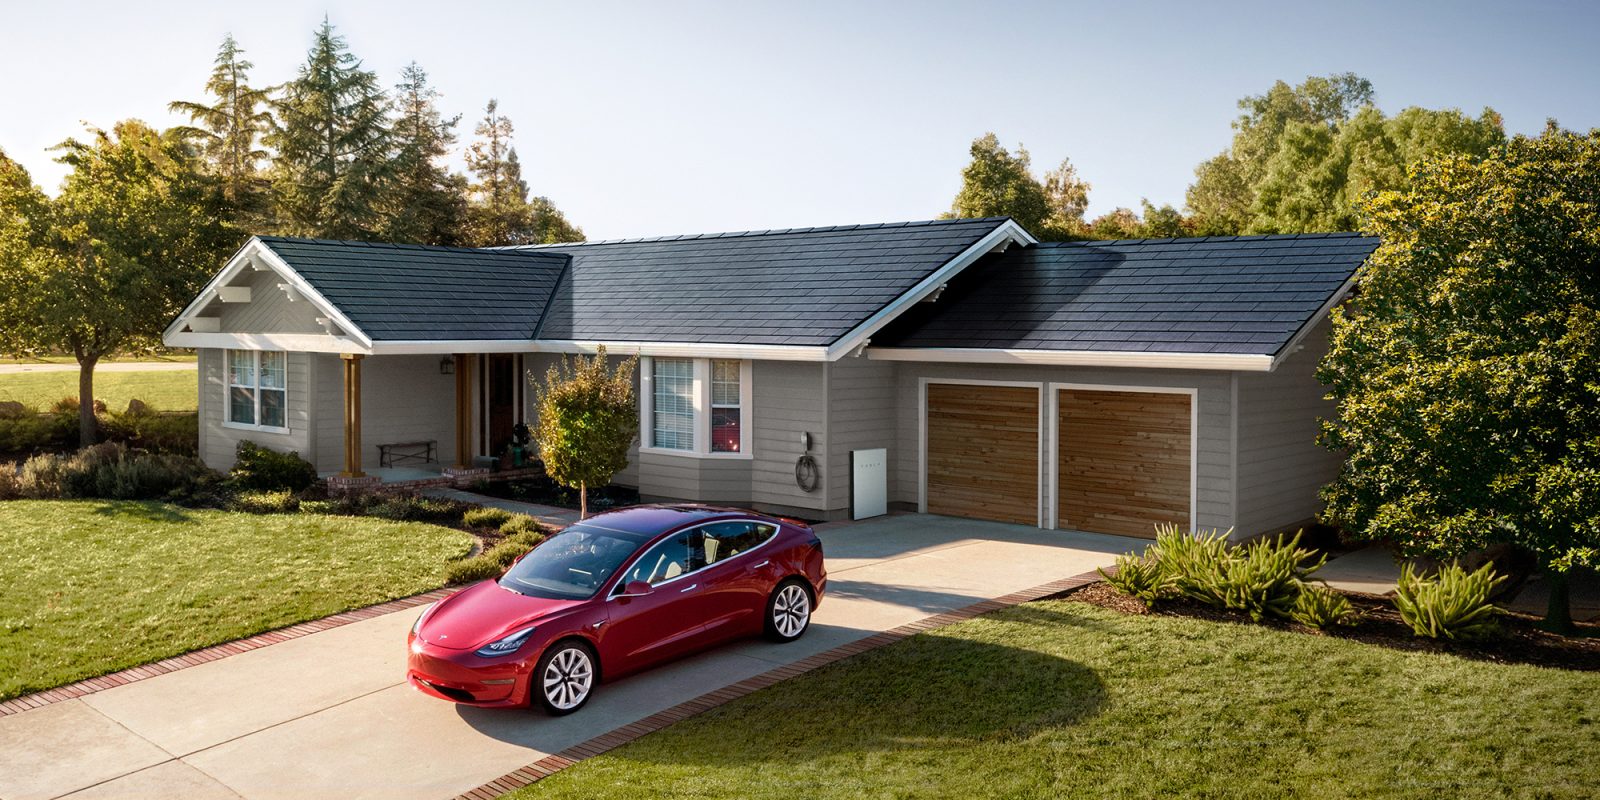 “Green Energy is The Future” Tesla Just LAUNCHED A Virtual Power Plant!